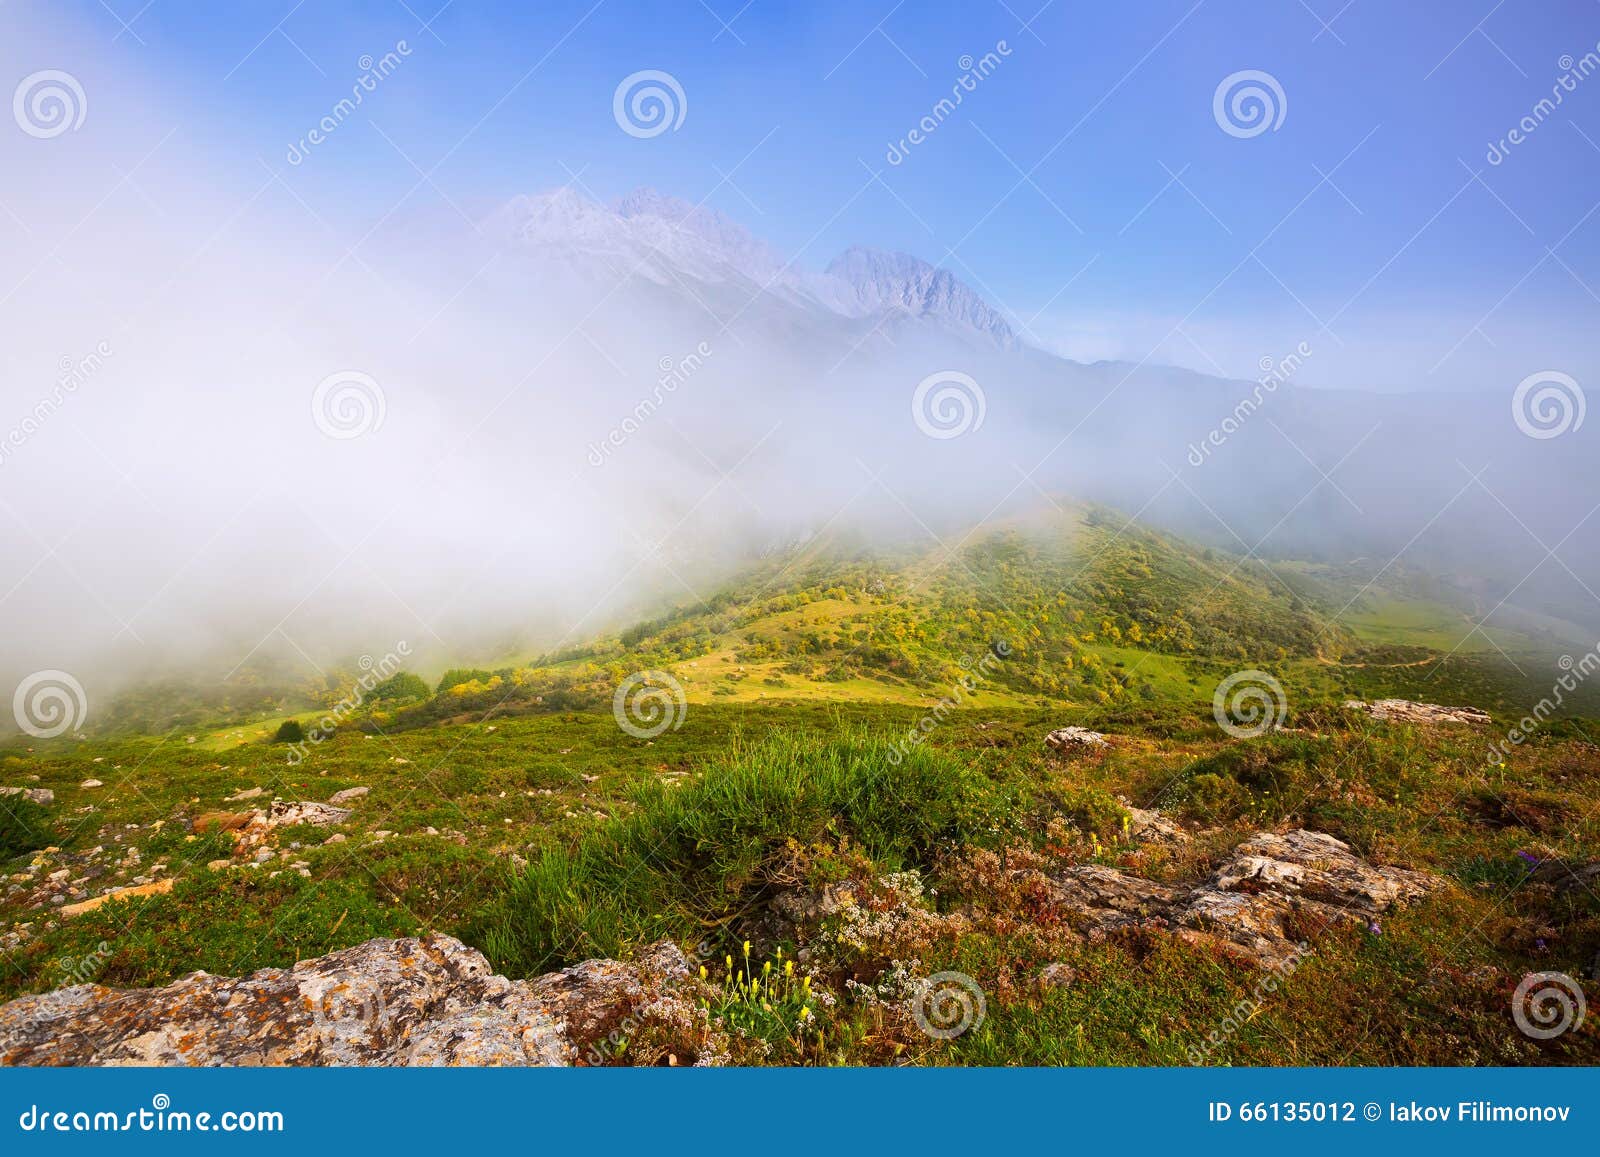 fog over mountains in summer